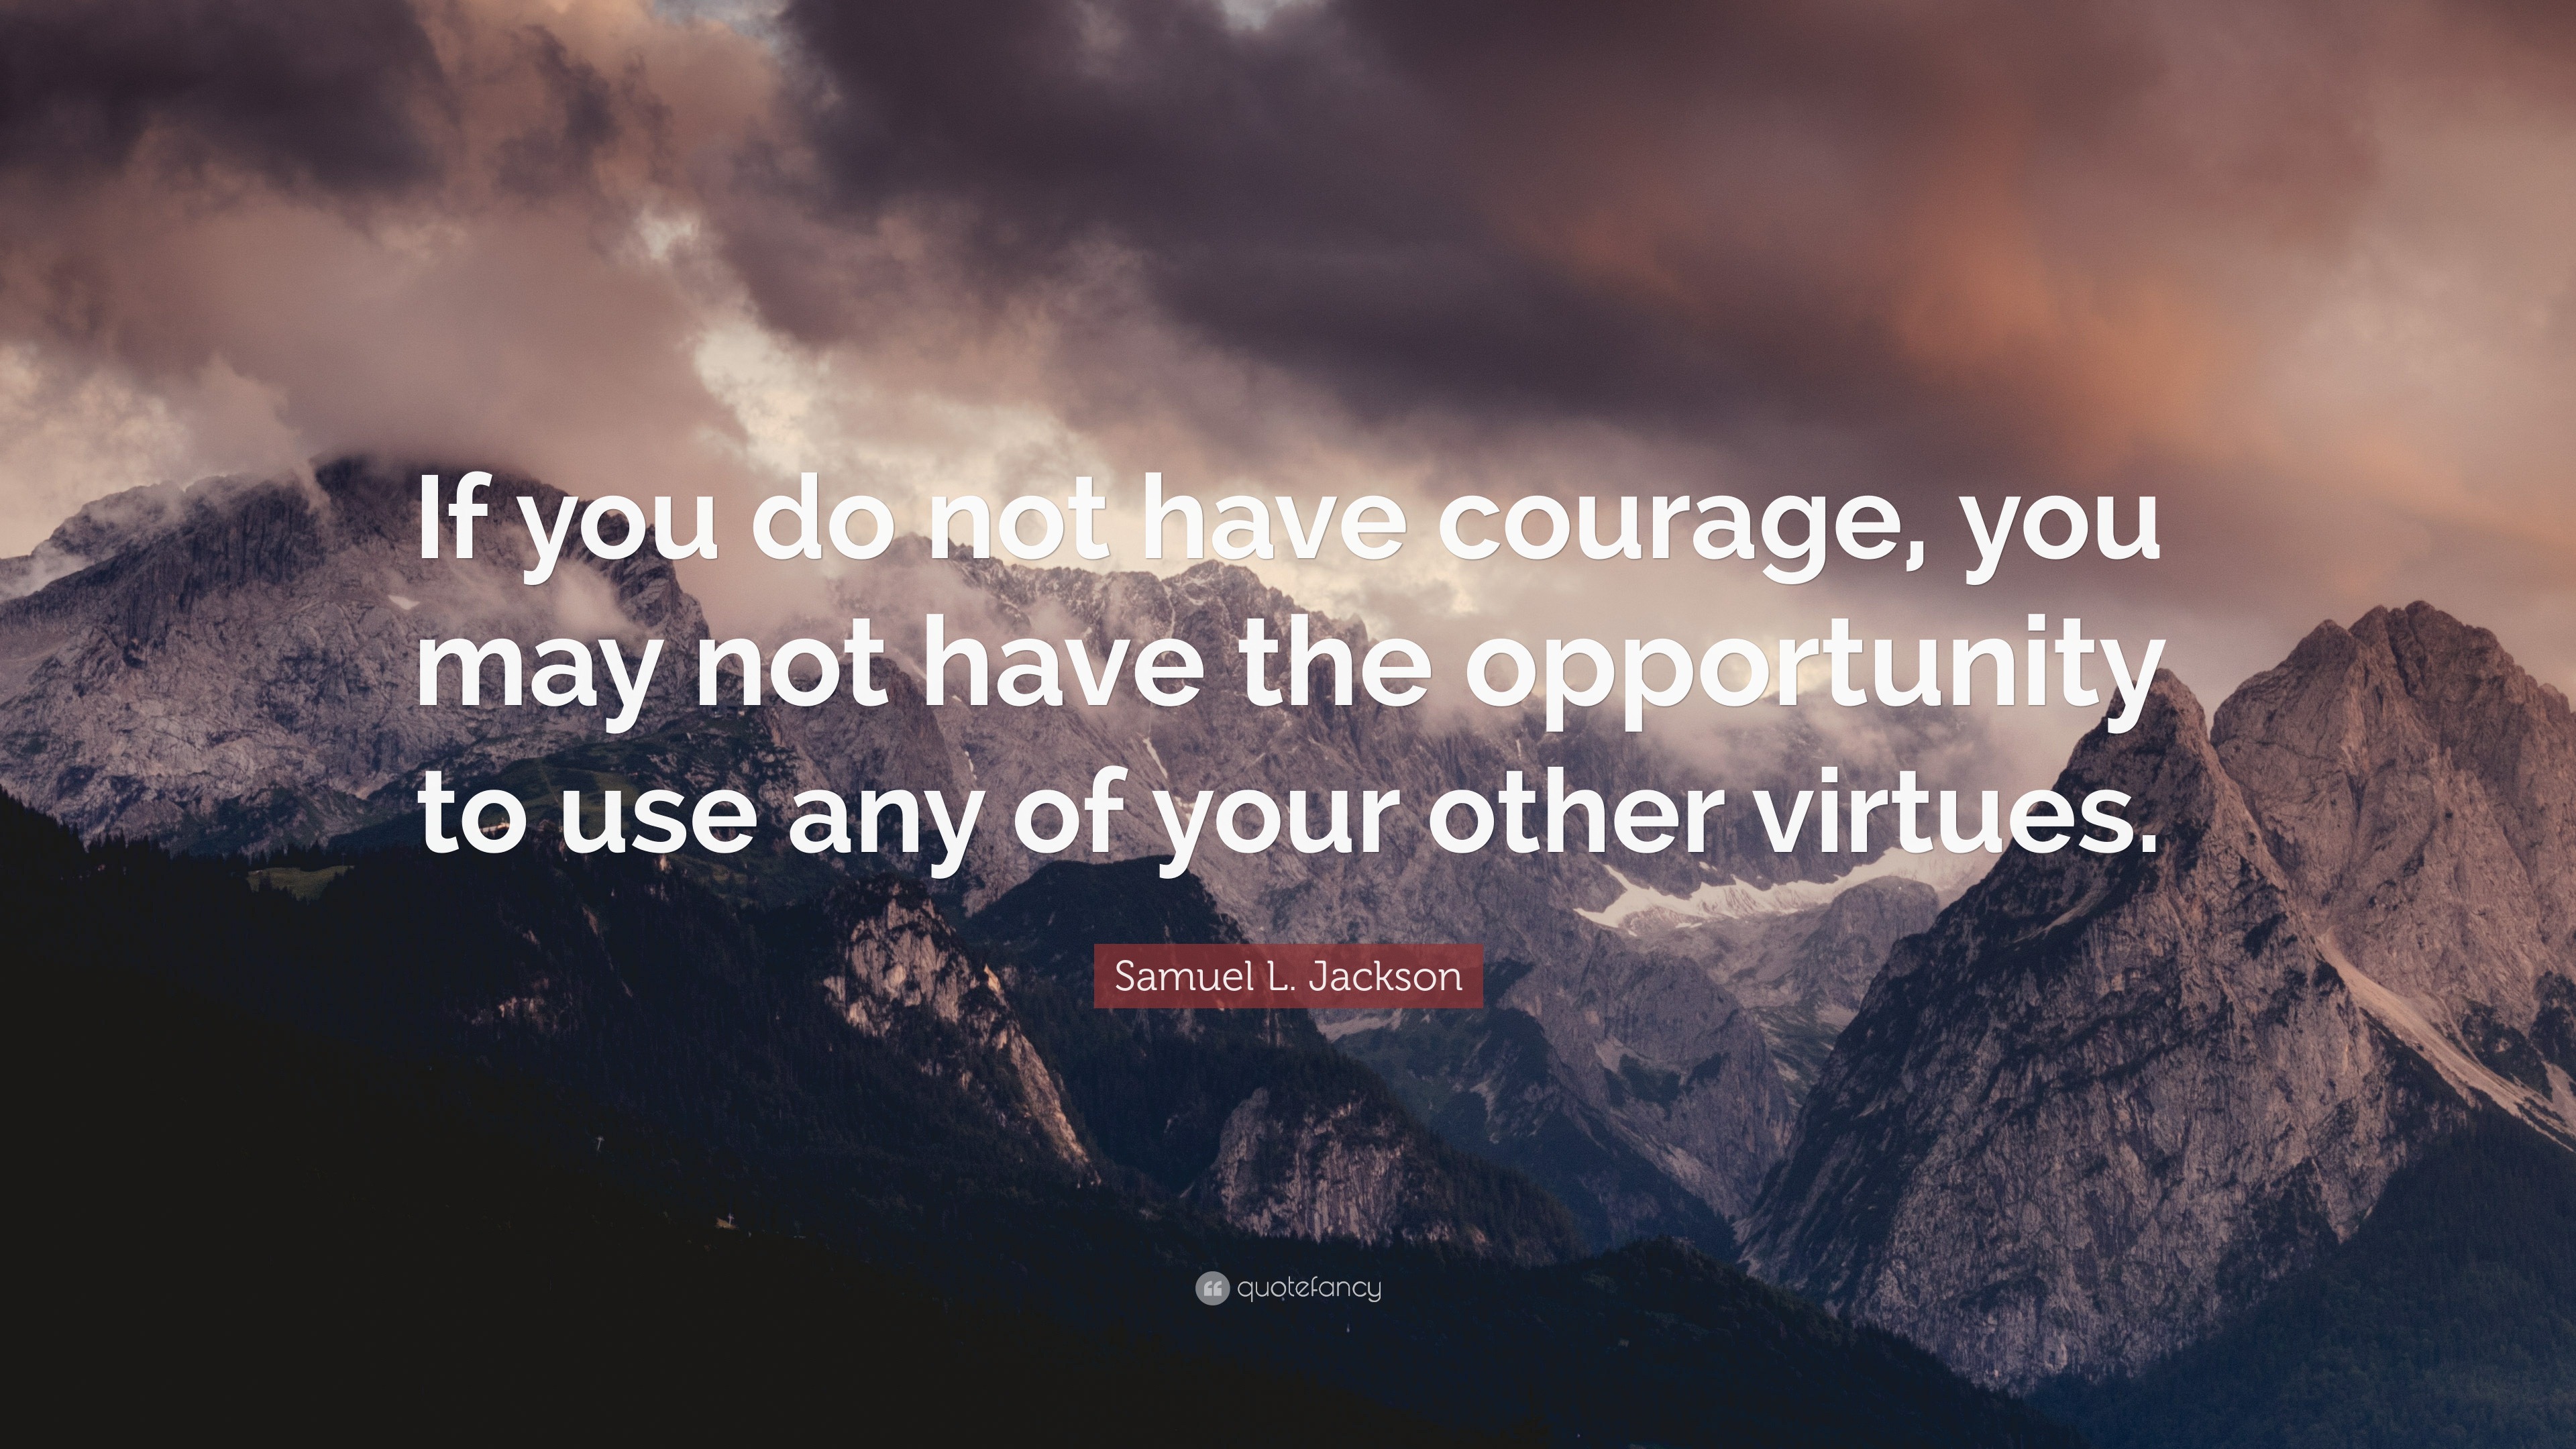 Samuel L. Jackson Quote: “If you do not have courage, you may not have ...